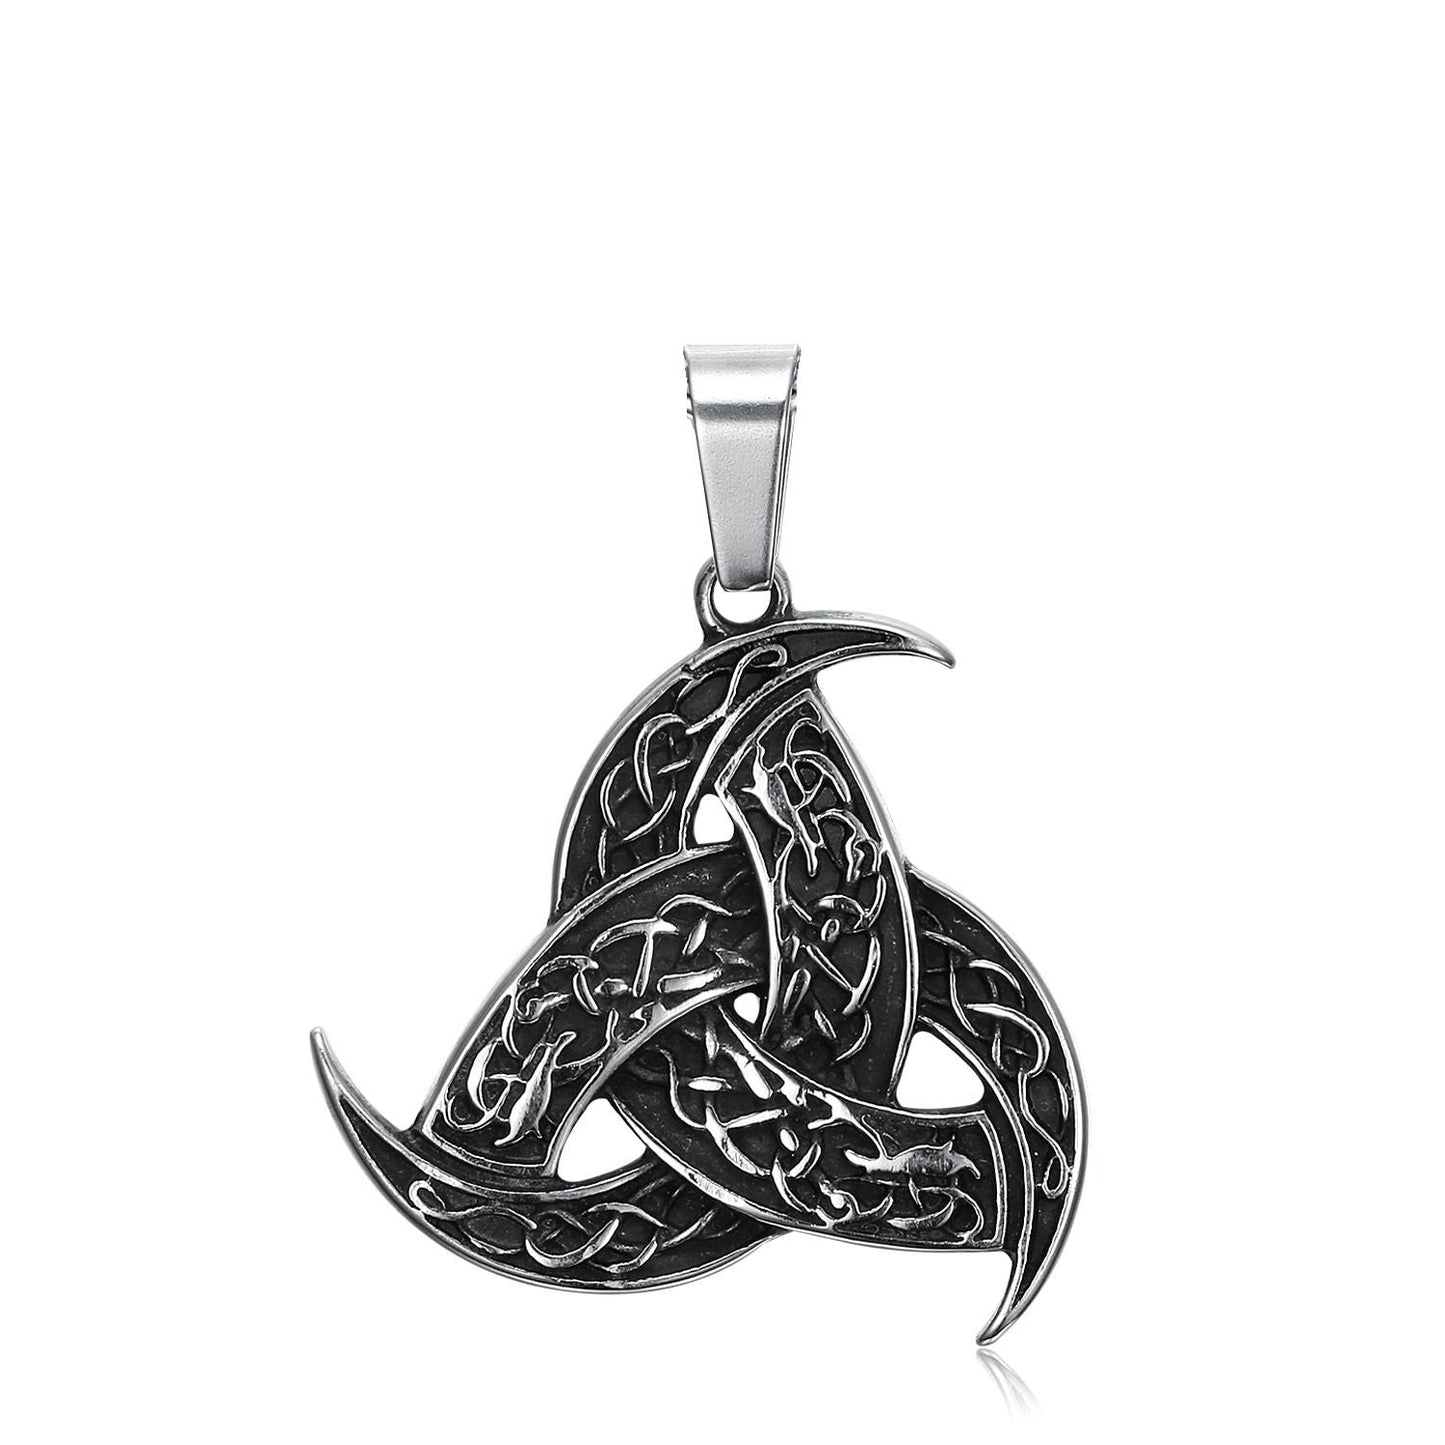 Odin Horn And Dragon Pendant Amulet Necklace